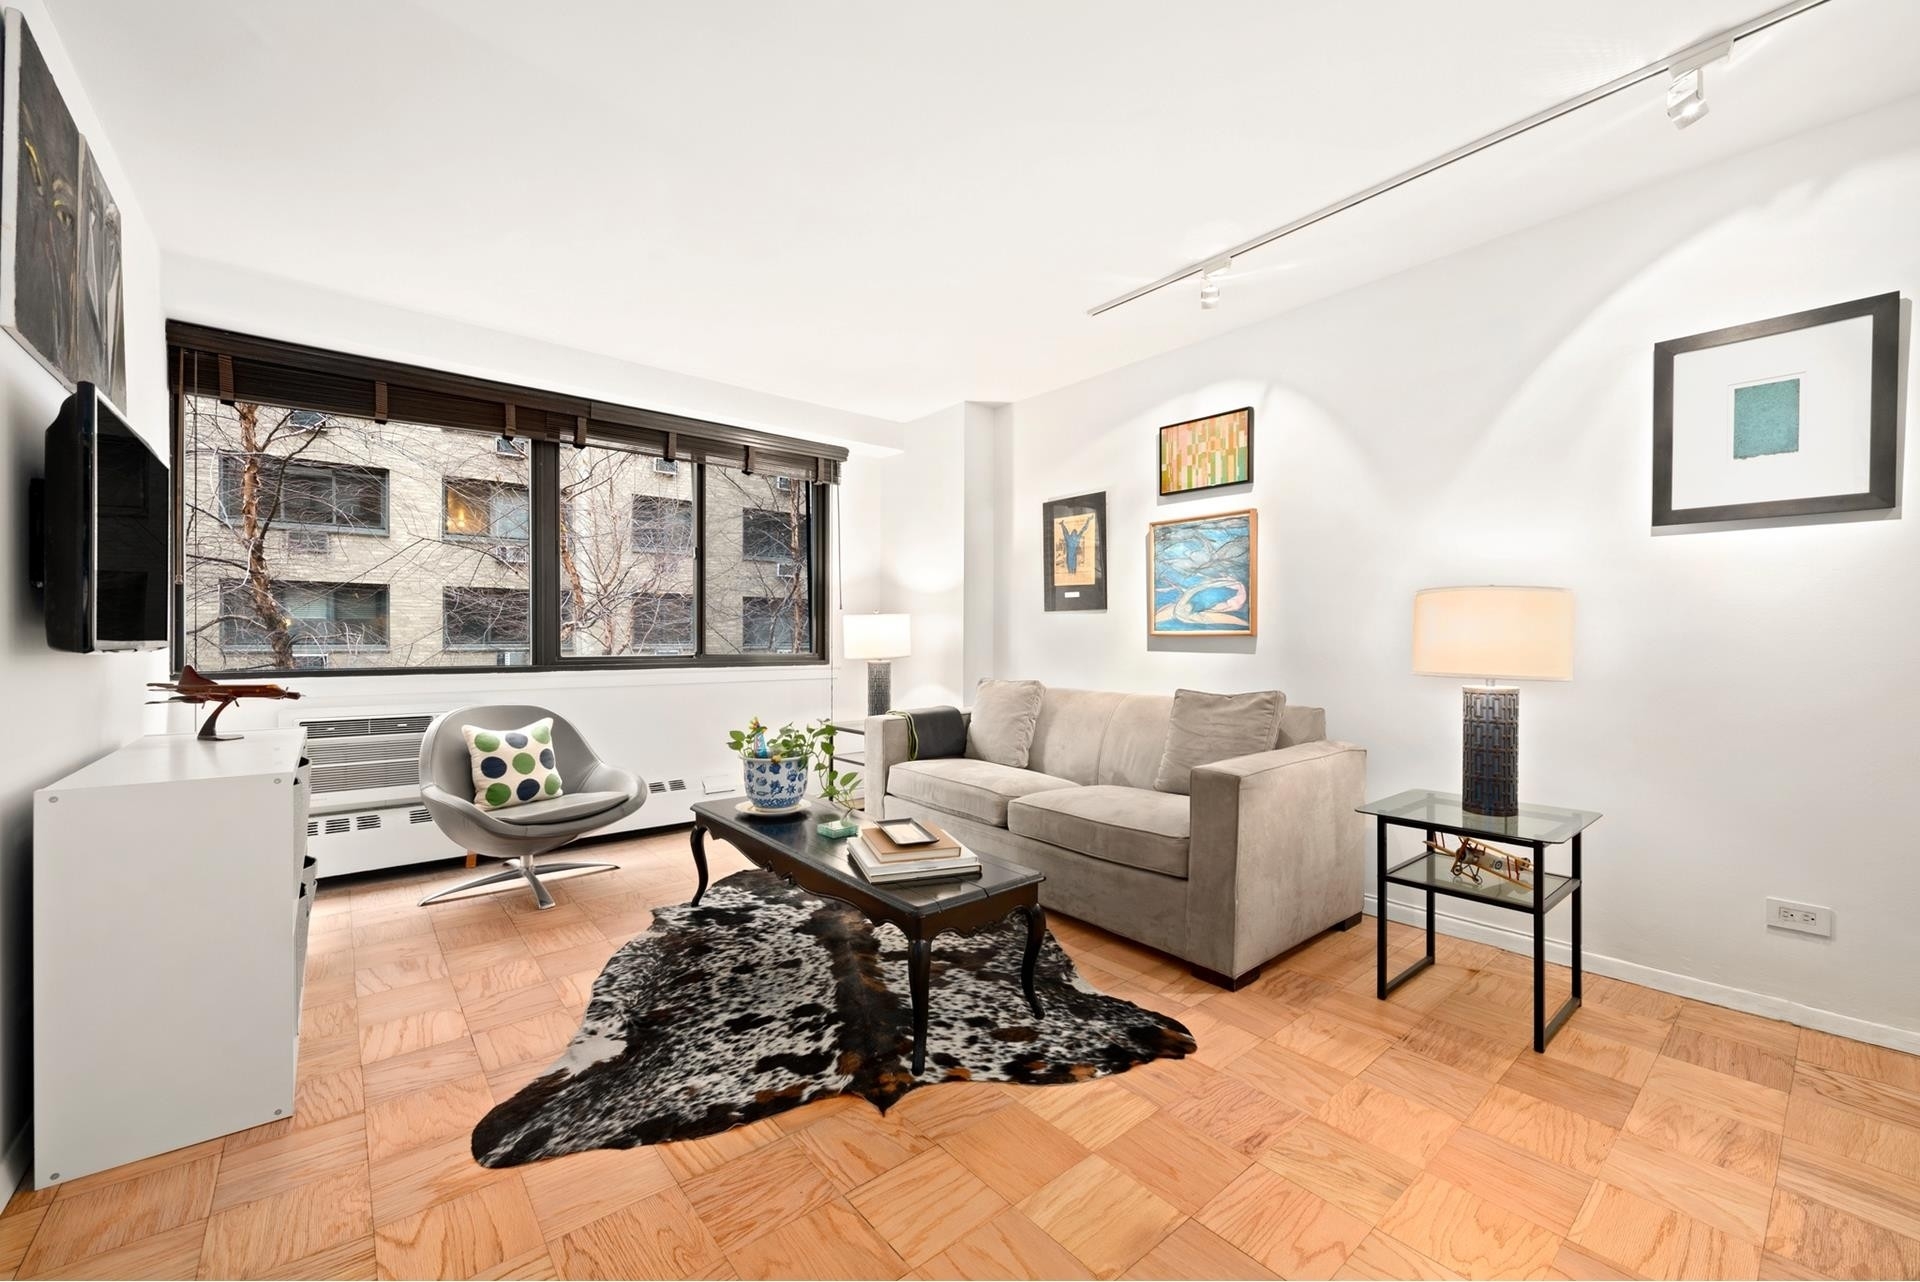 Co-op Properties for Sale at Chelsea Lane, 16 W 16TH ST, 3ES Union Square, New York, NY 10011